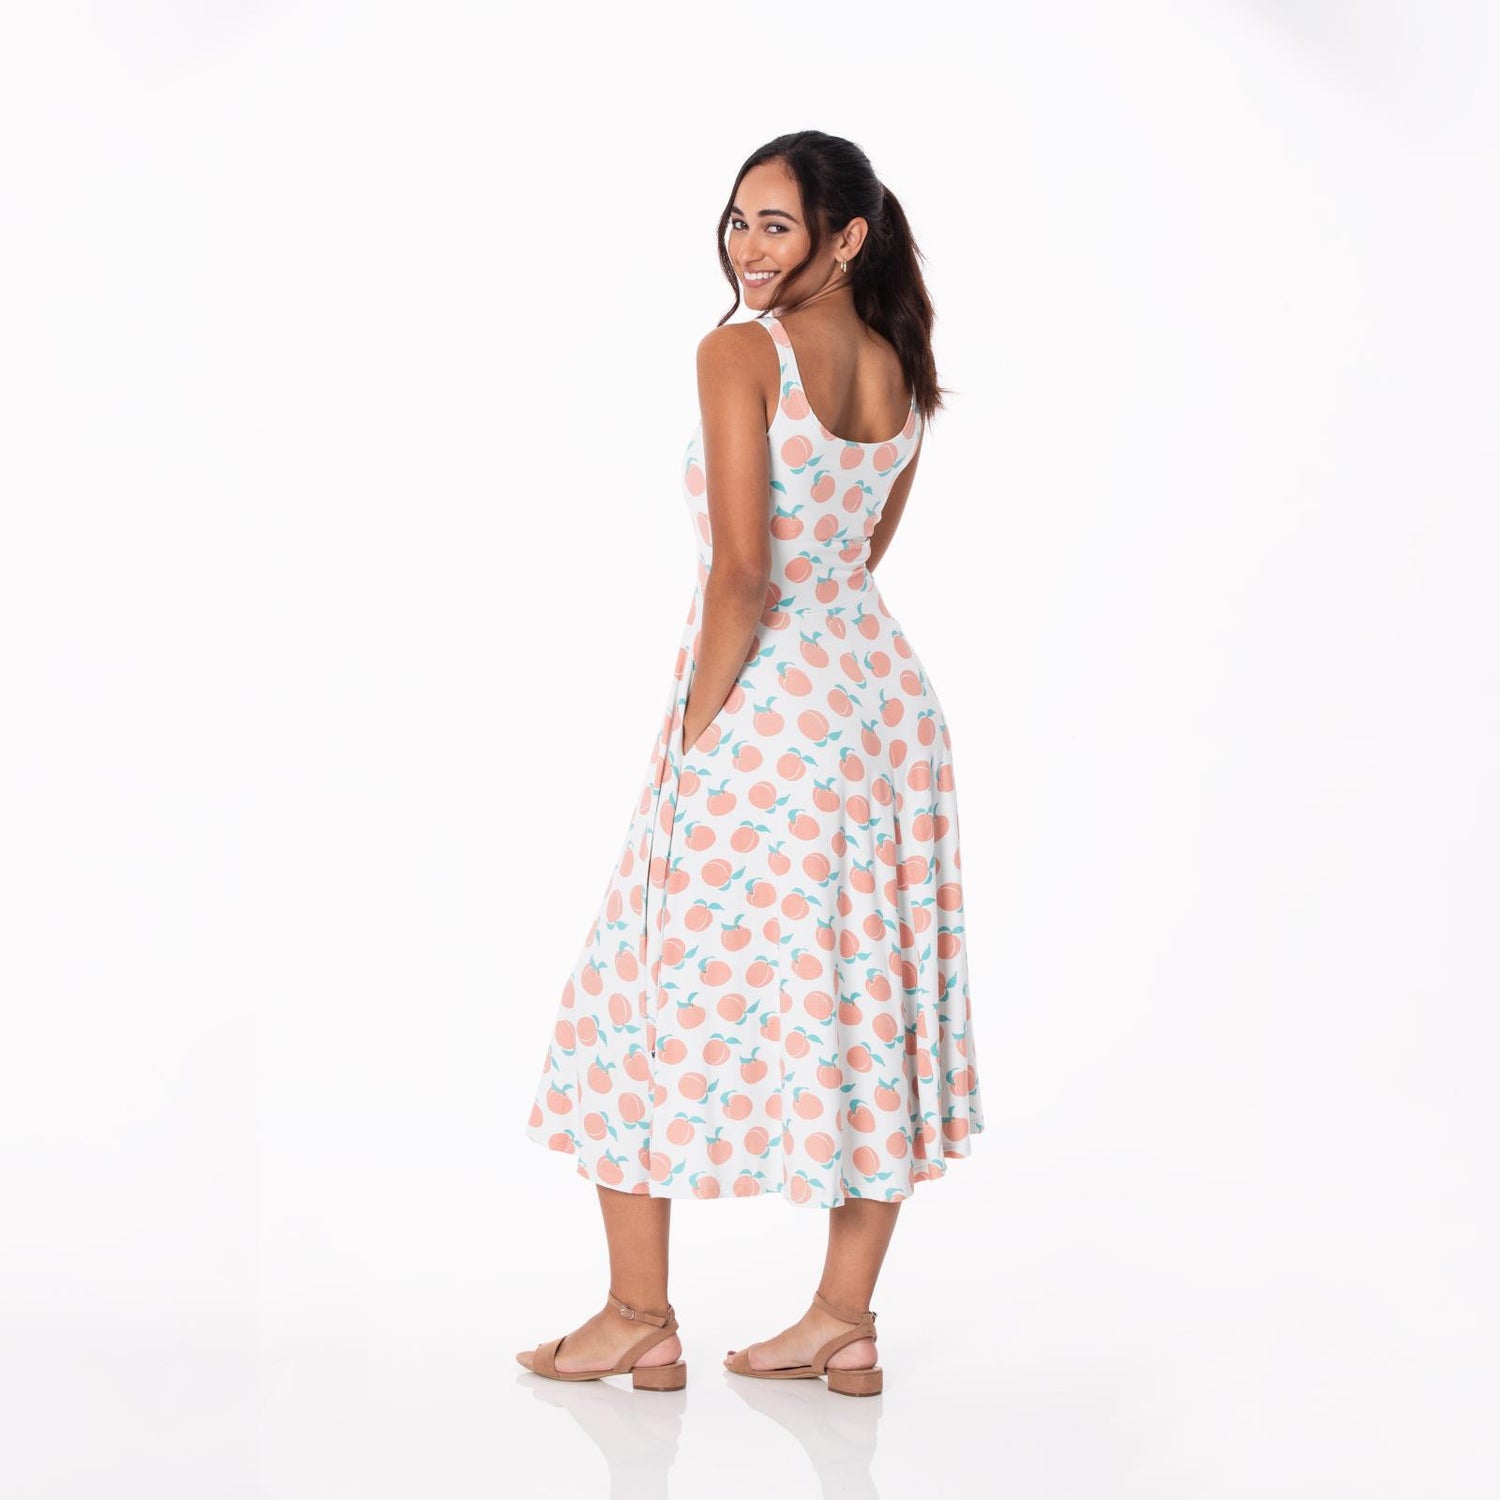 Women's Print Boardwalk Dress with Luxe Top in Fresh Air Peaches